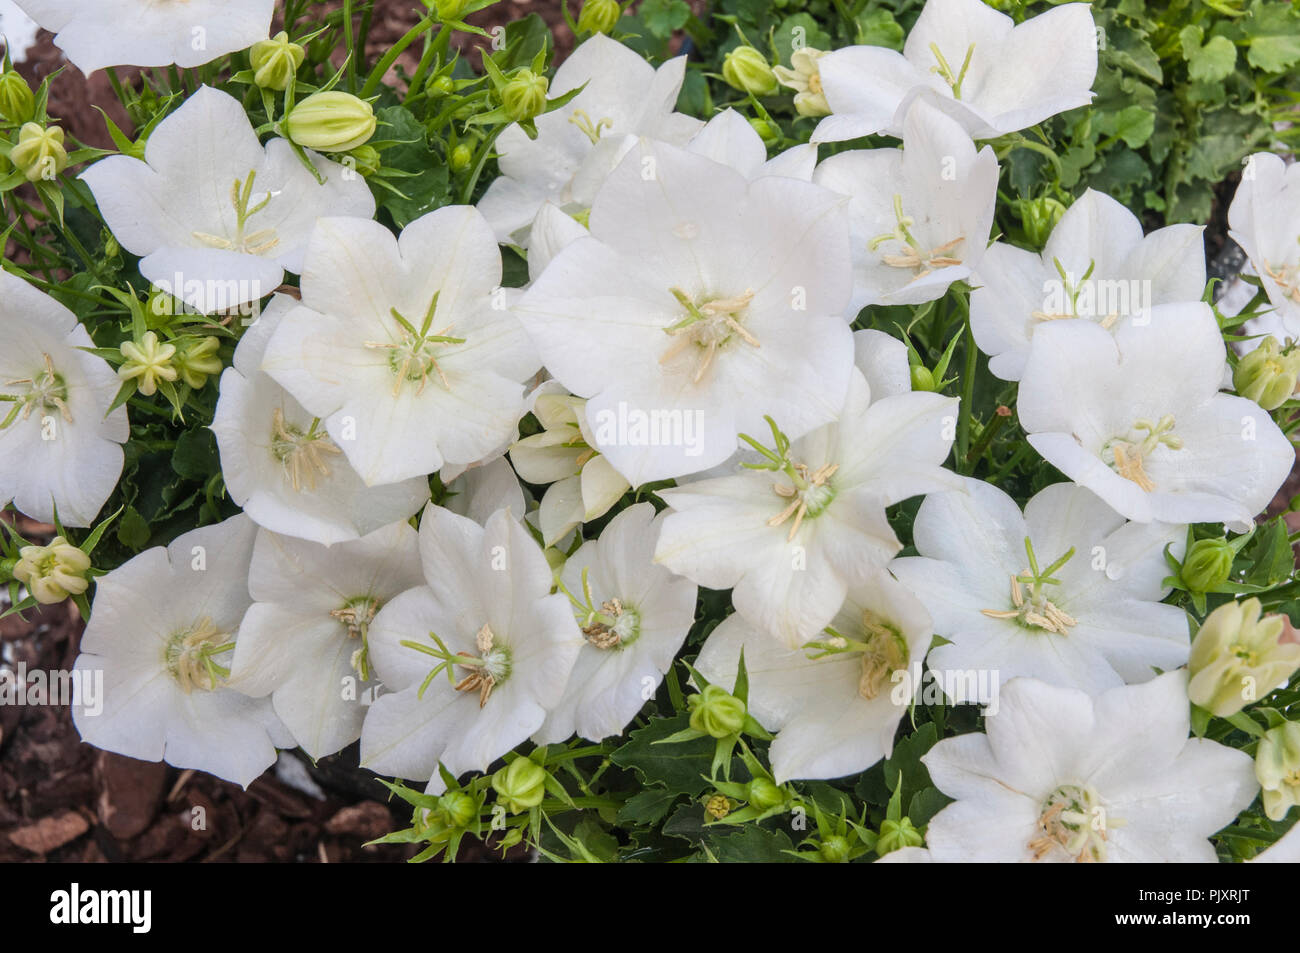 Campanula Carpatica White Clips. Clump forming perennial that is pure white. Ideal for borders and containers. Stock Photo